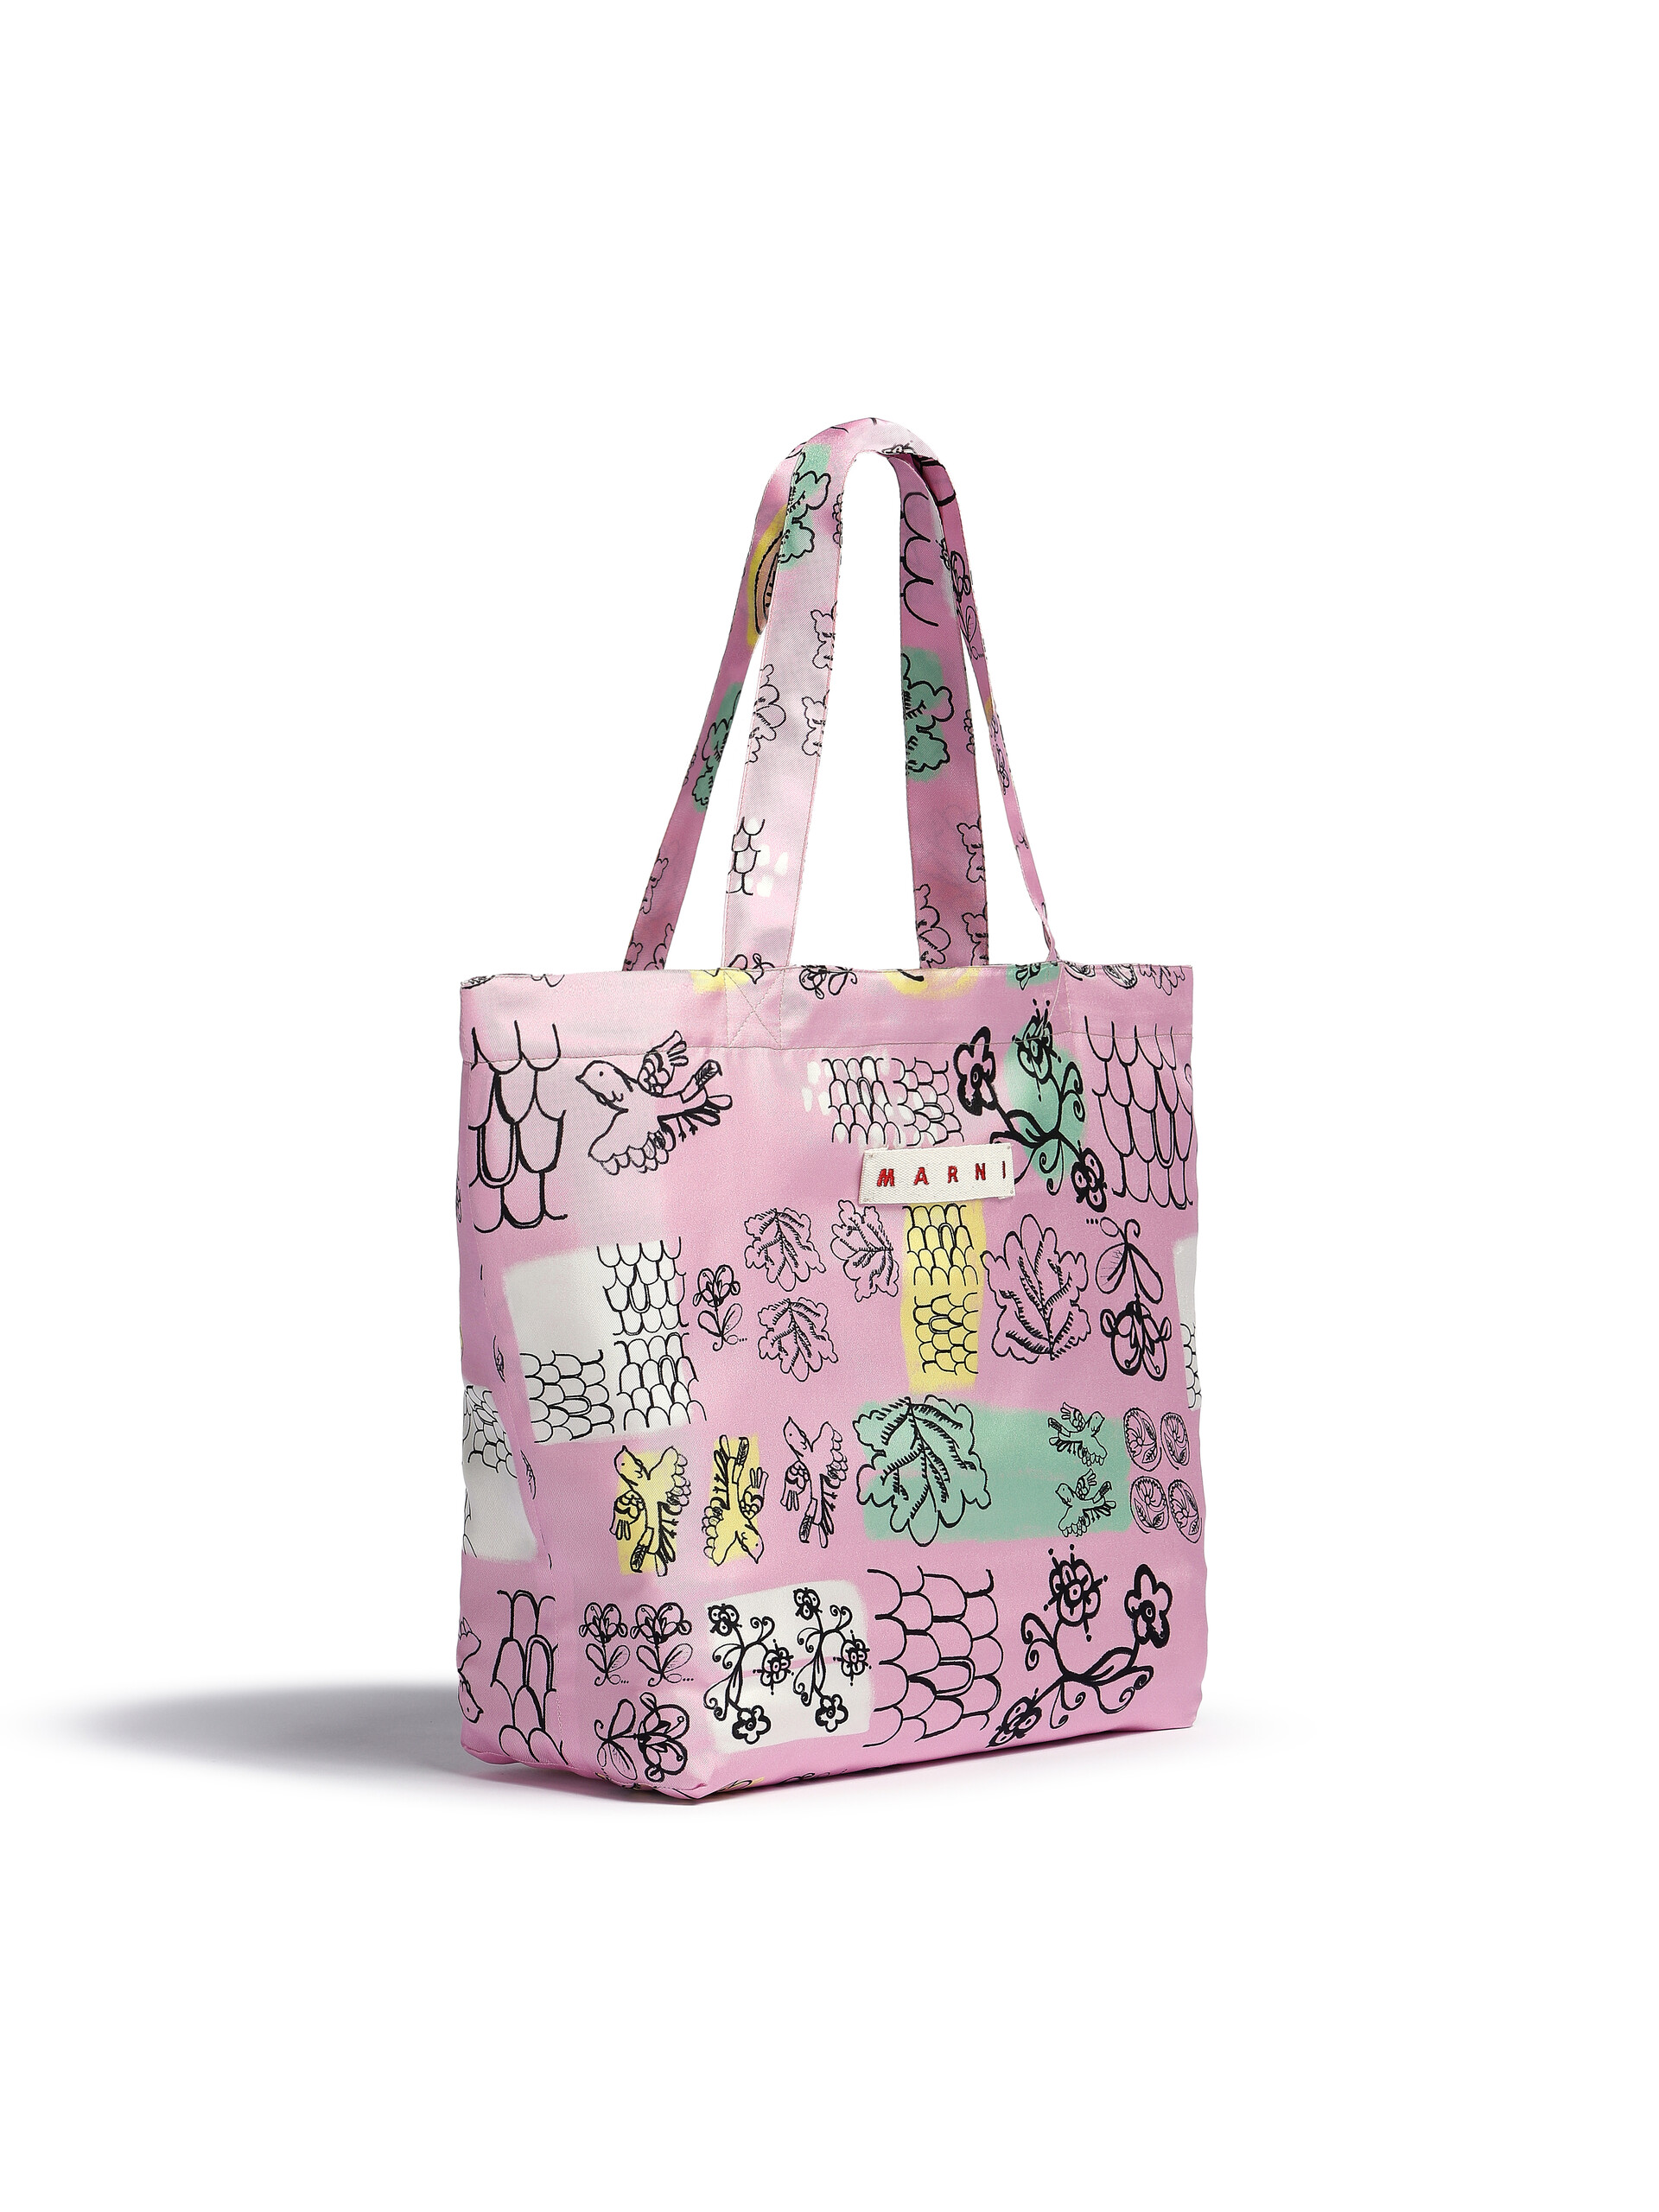 Pink and black silk tote bag with archival graphic print - Bags - Image 2